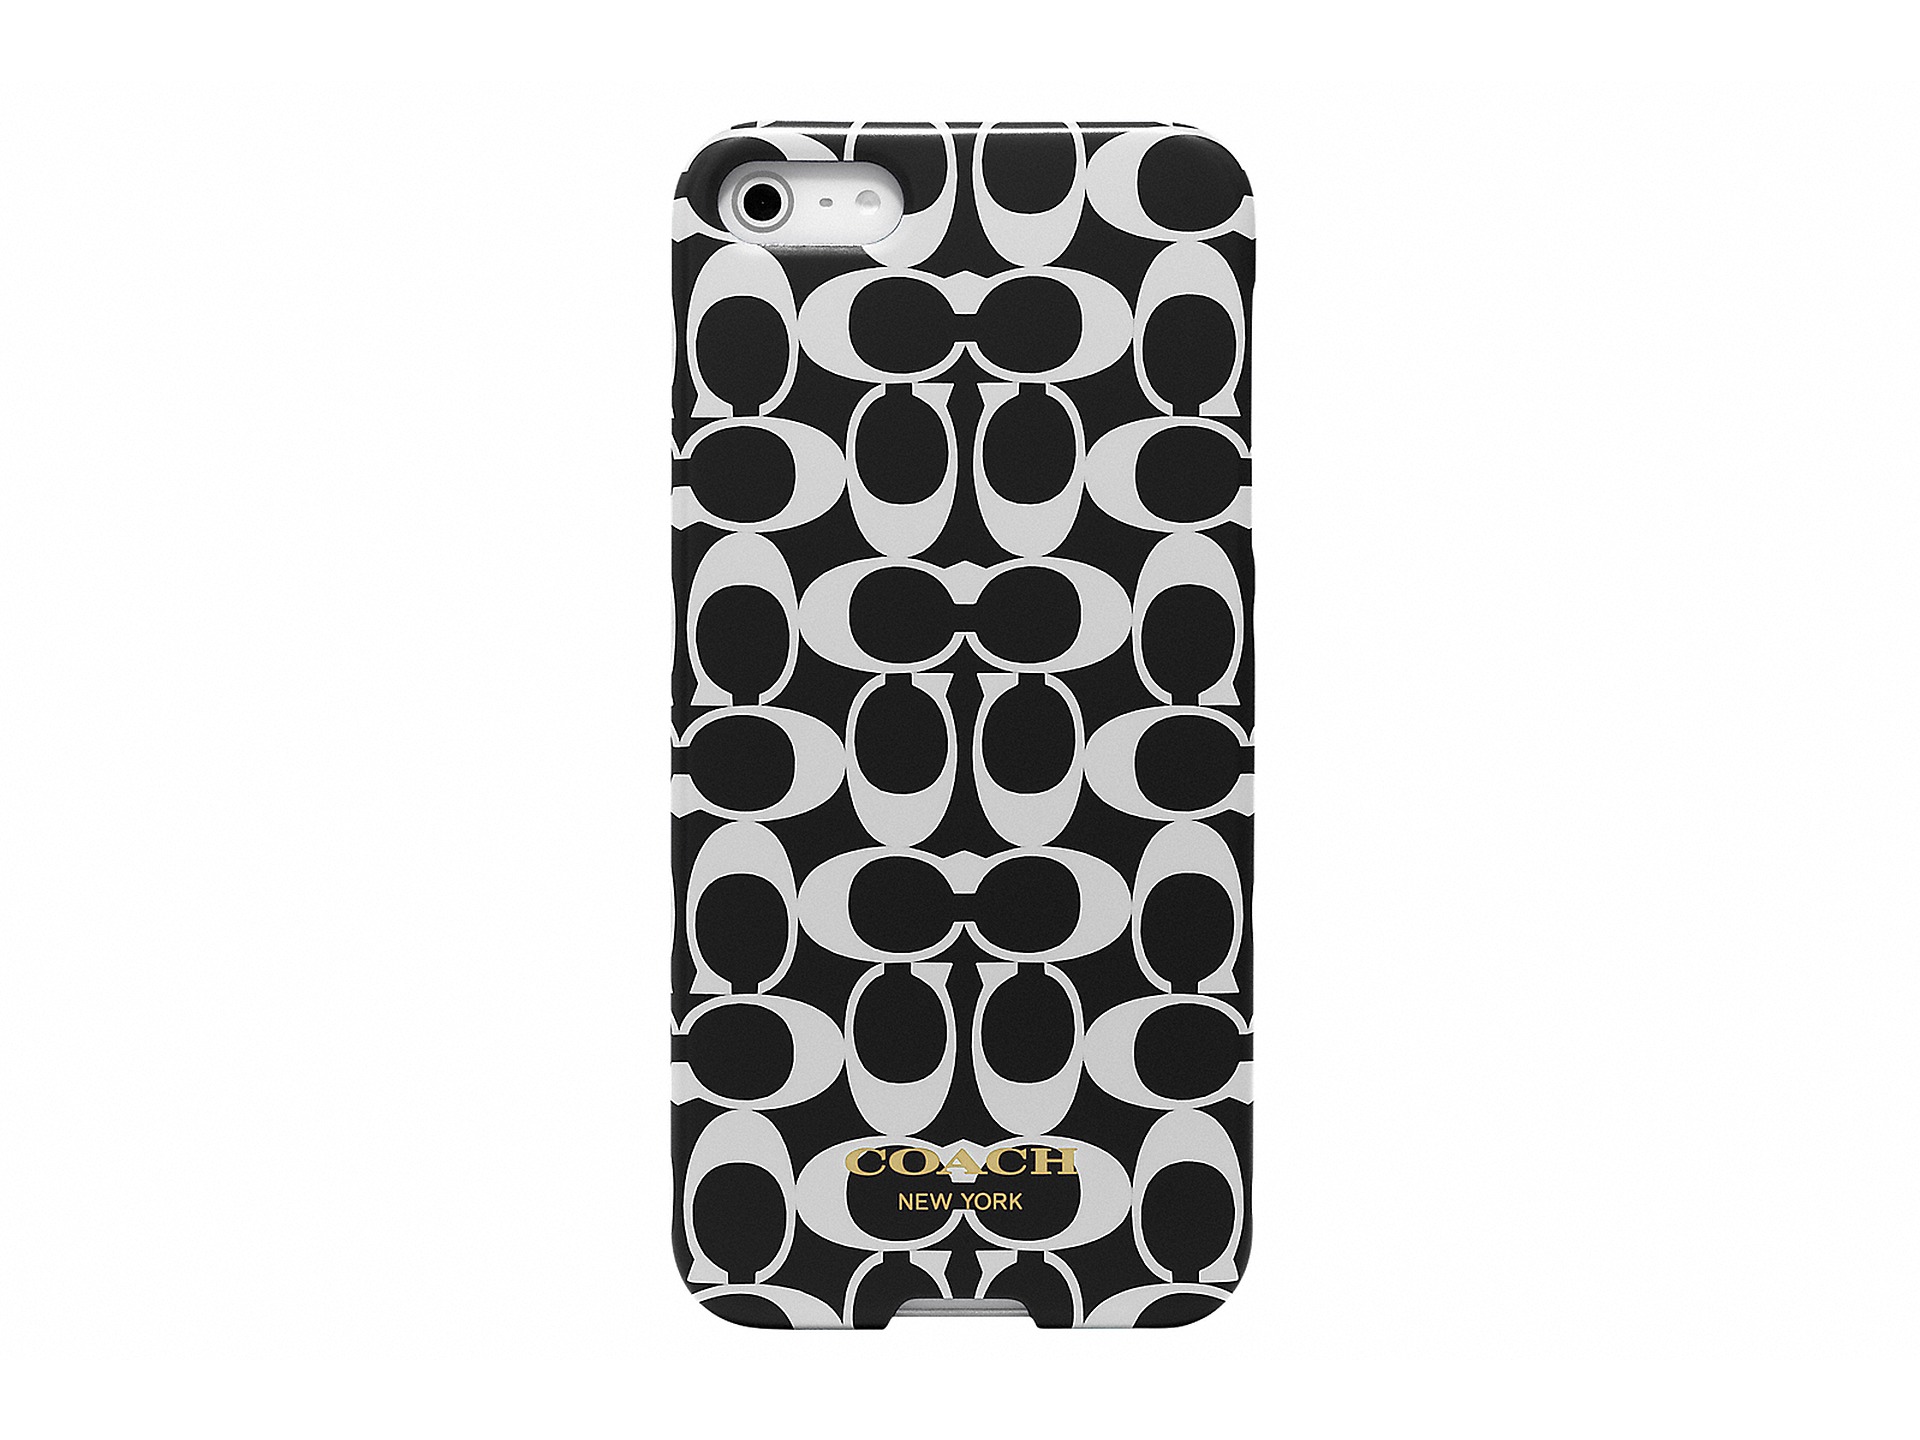 Coach Wallpaper For iPhone Image Pictures Becuo